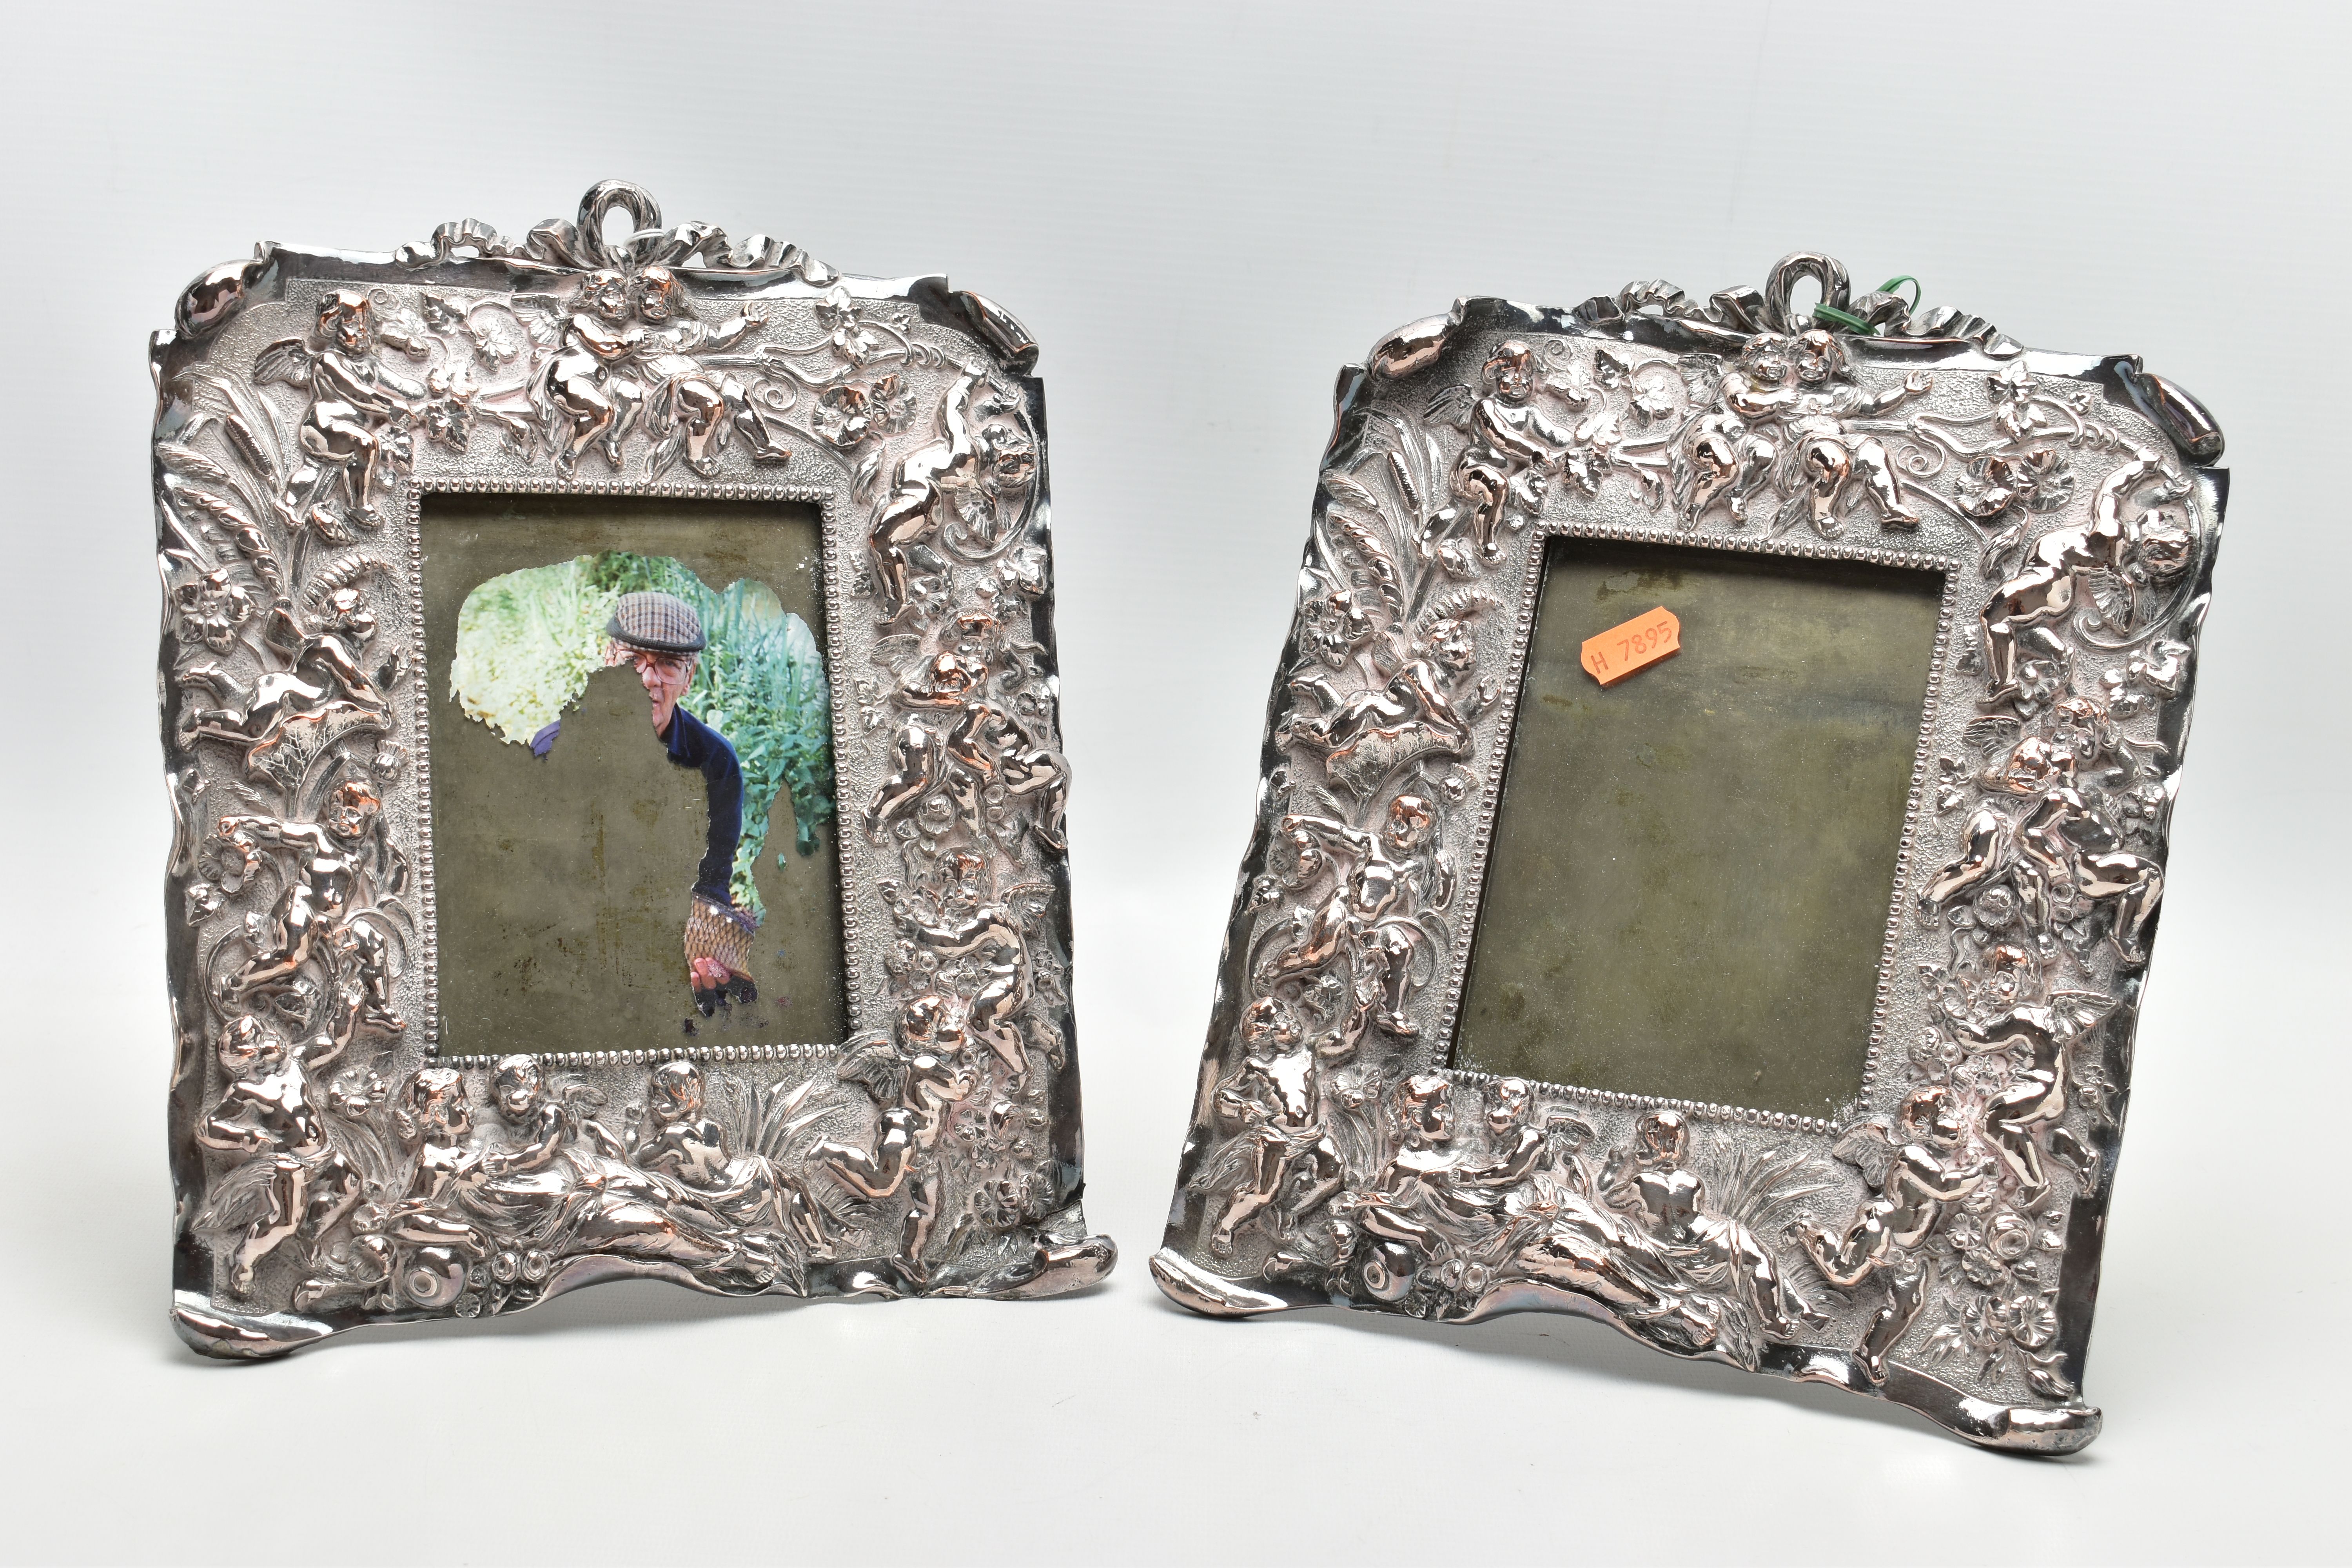 A PAIR OF WHITE METAL PHOTO FRAMES, rectangular form, detailed with a number of cherubs, a woman and